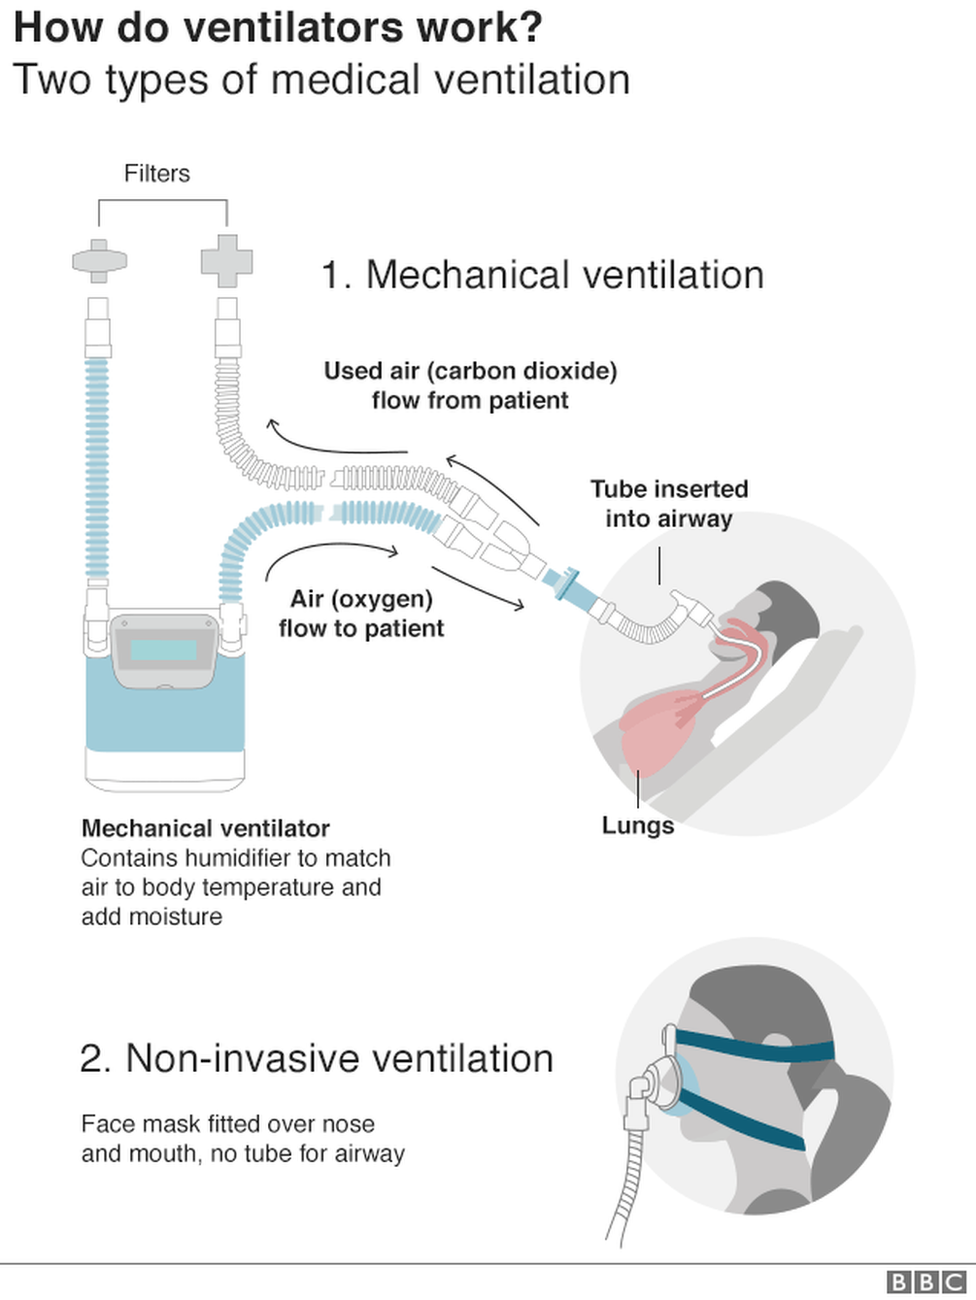 Graphicshowing two common types of medical ventilation